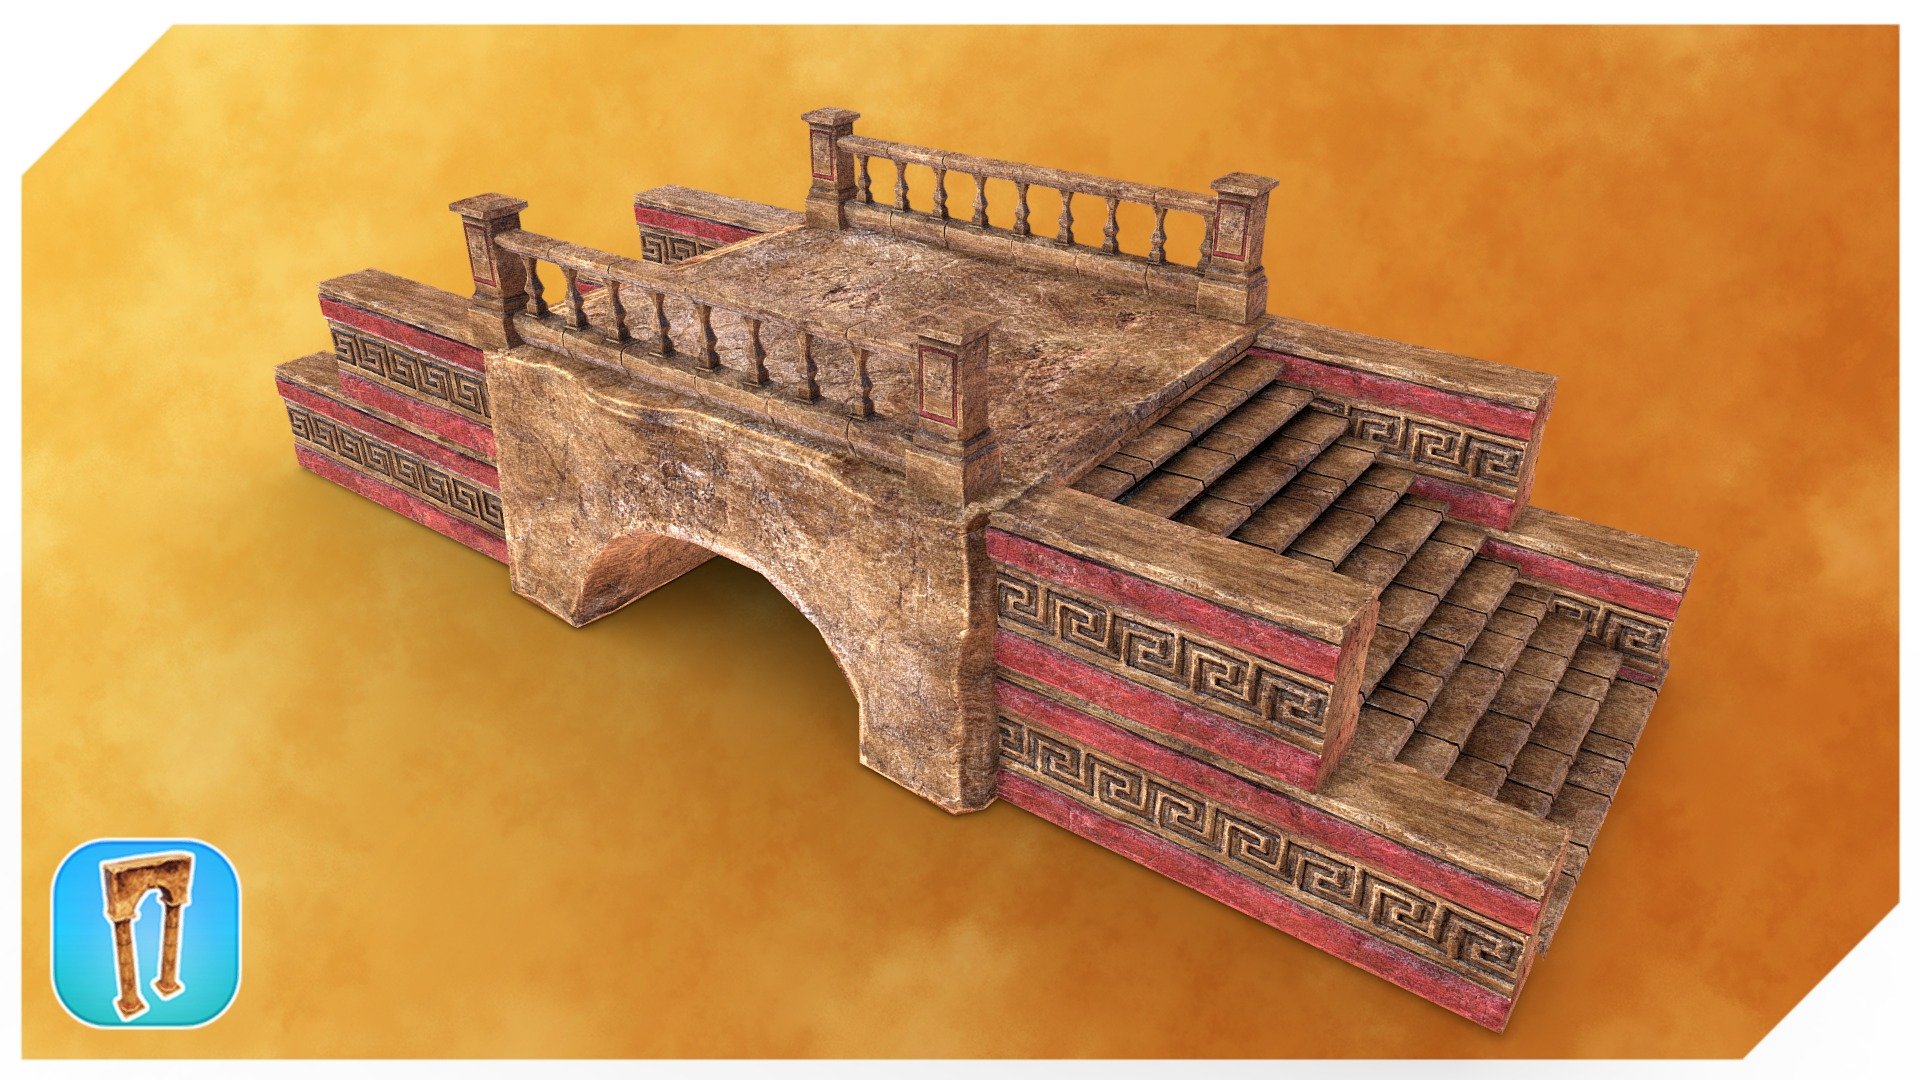 Bridge asset created from five individual assets with separate texture sets. 
Individual assets can be used as well. Comes with 2k PBR texture sets (Albedo, Normal, Roughness and AO).
Highly optimized for use in realtime 3d model